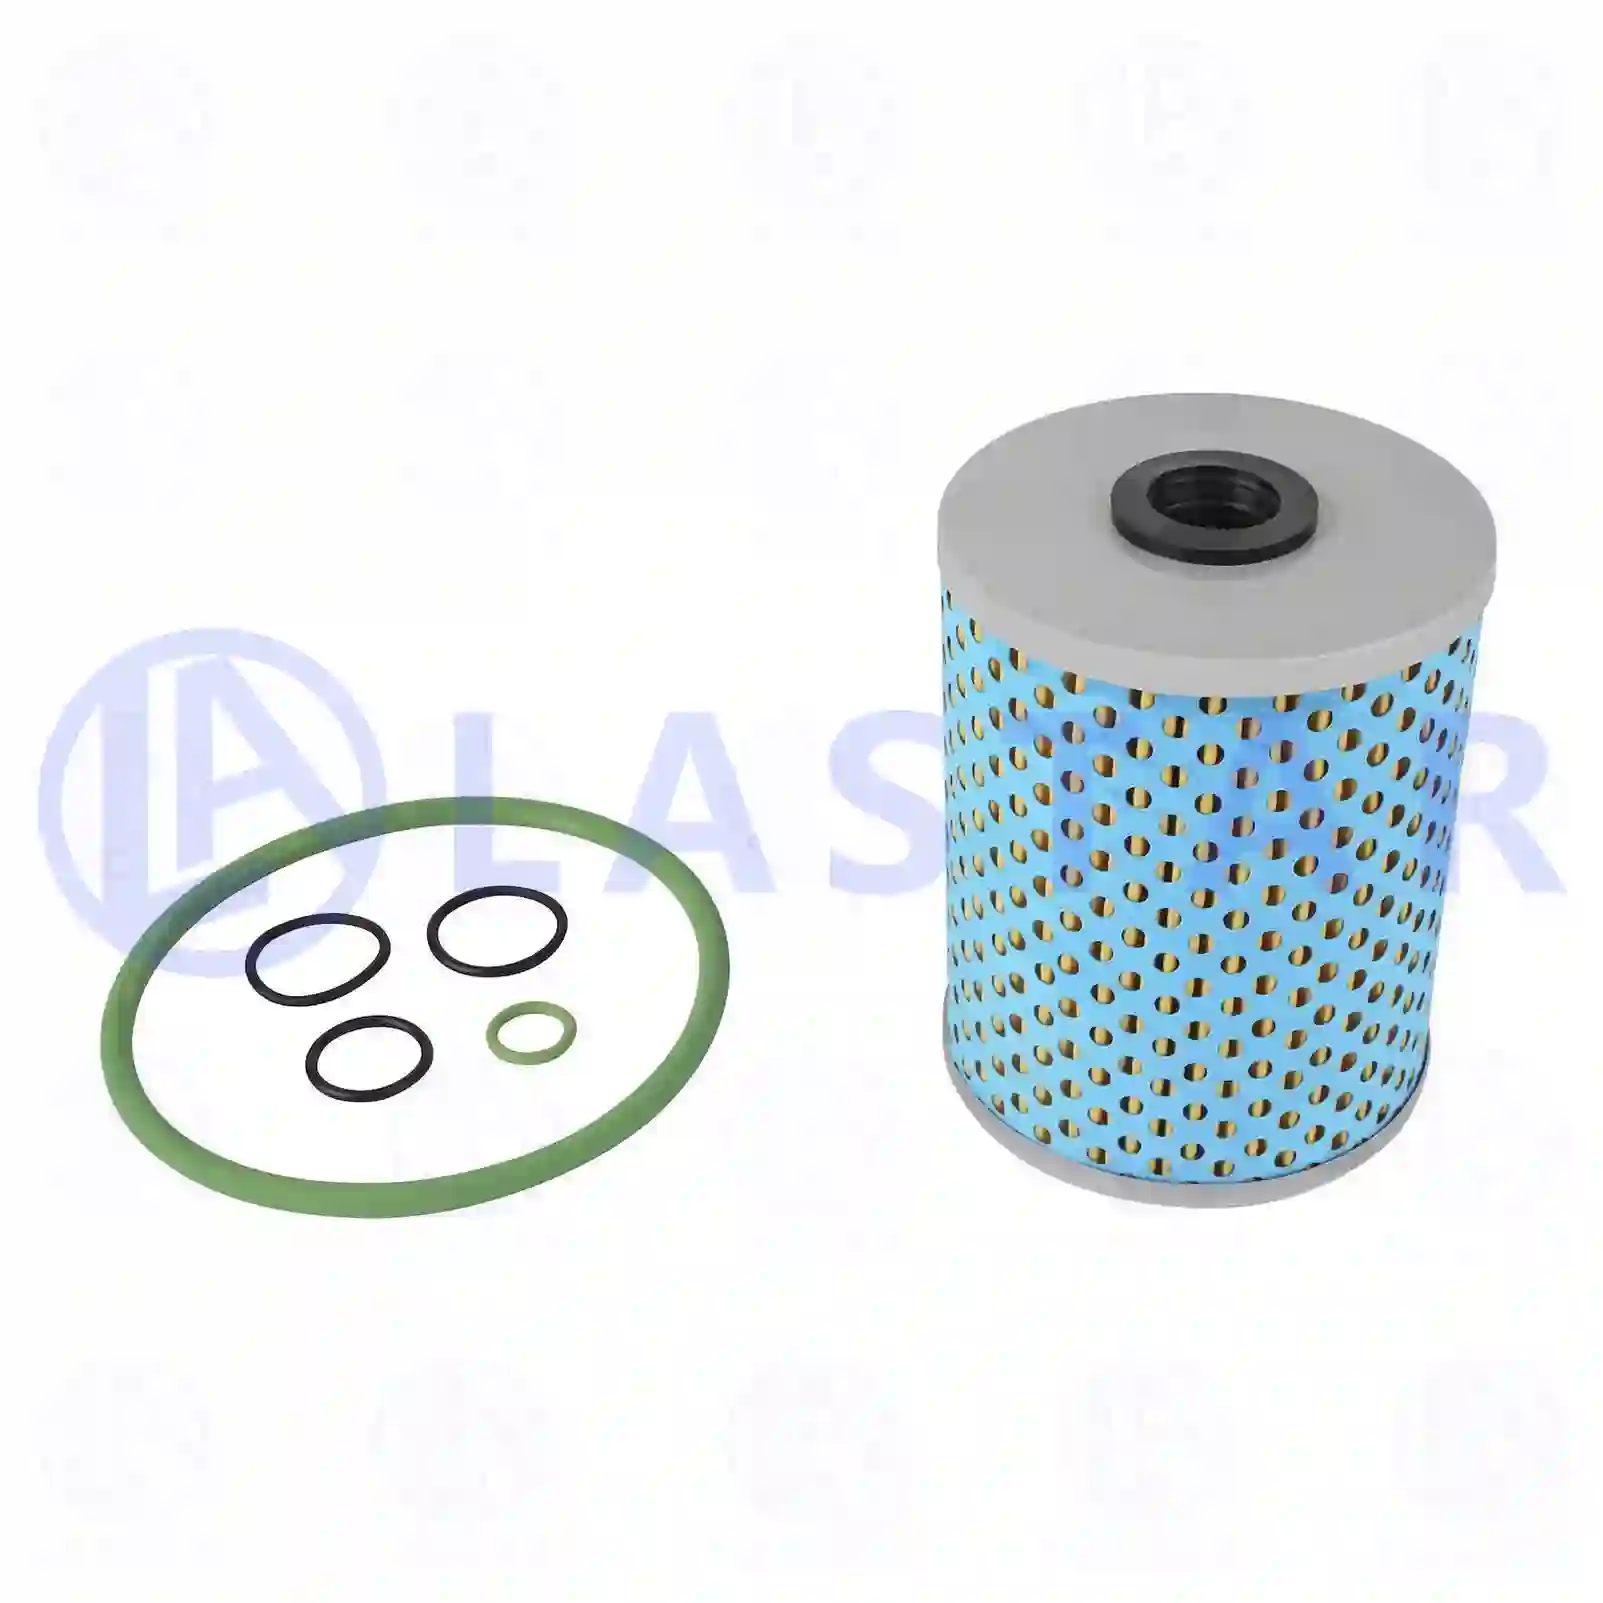 Oil filter, retarder, with seal rings, 77733777, 1893214, ZG02431-0008 ||  77733777 Lastar Spare Part | Truck Spare Parts, Auotomotive Spare Parts Oil filter, retarder, with seal rings, 77733777, 1893214, ZG02431-0008 ||  77733777 Lastar Spare Part | Truck Spare Parts, Auotomotive Spare Parts